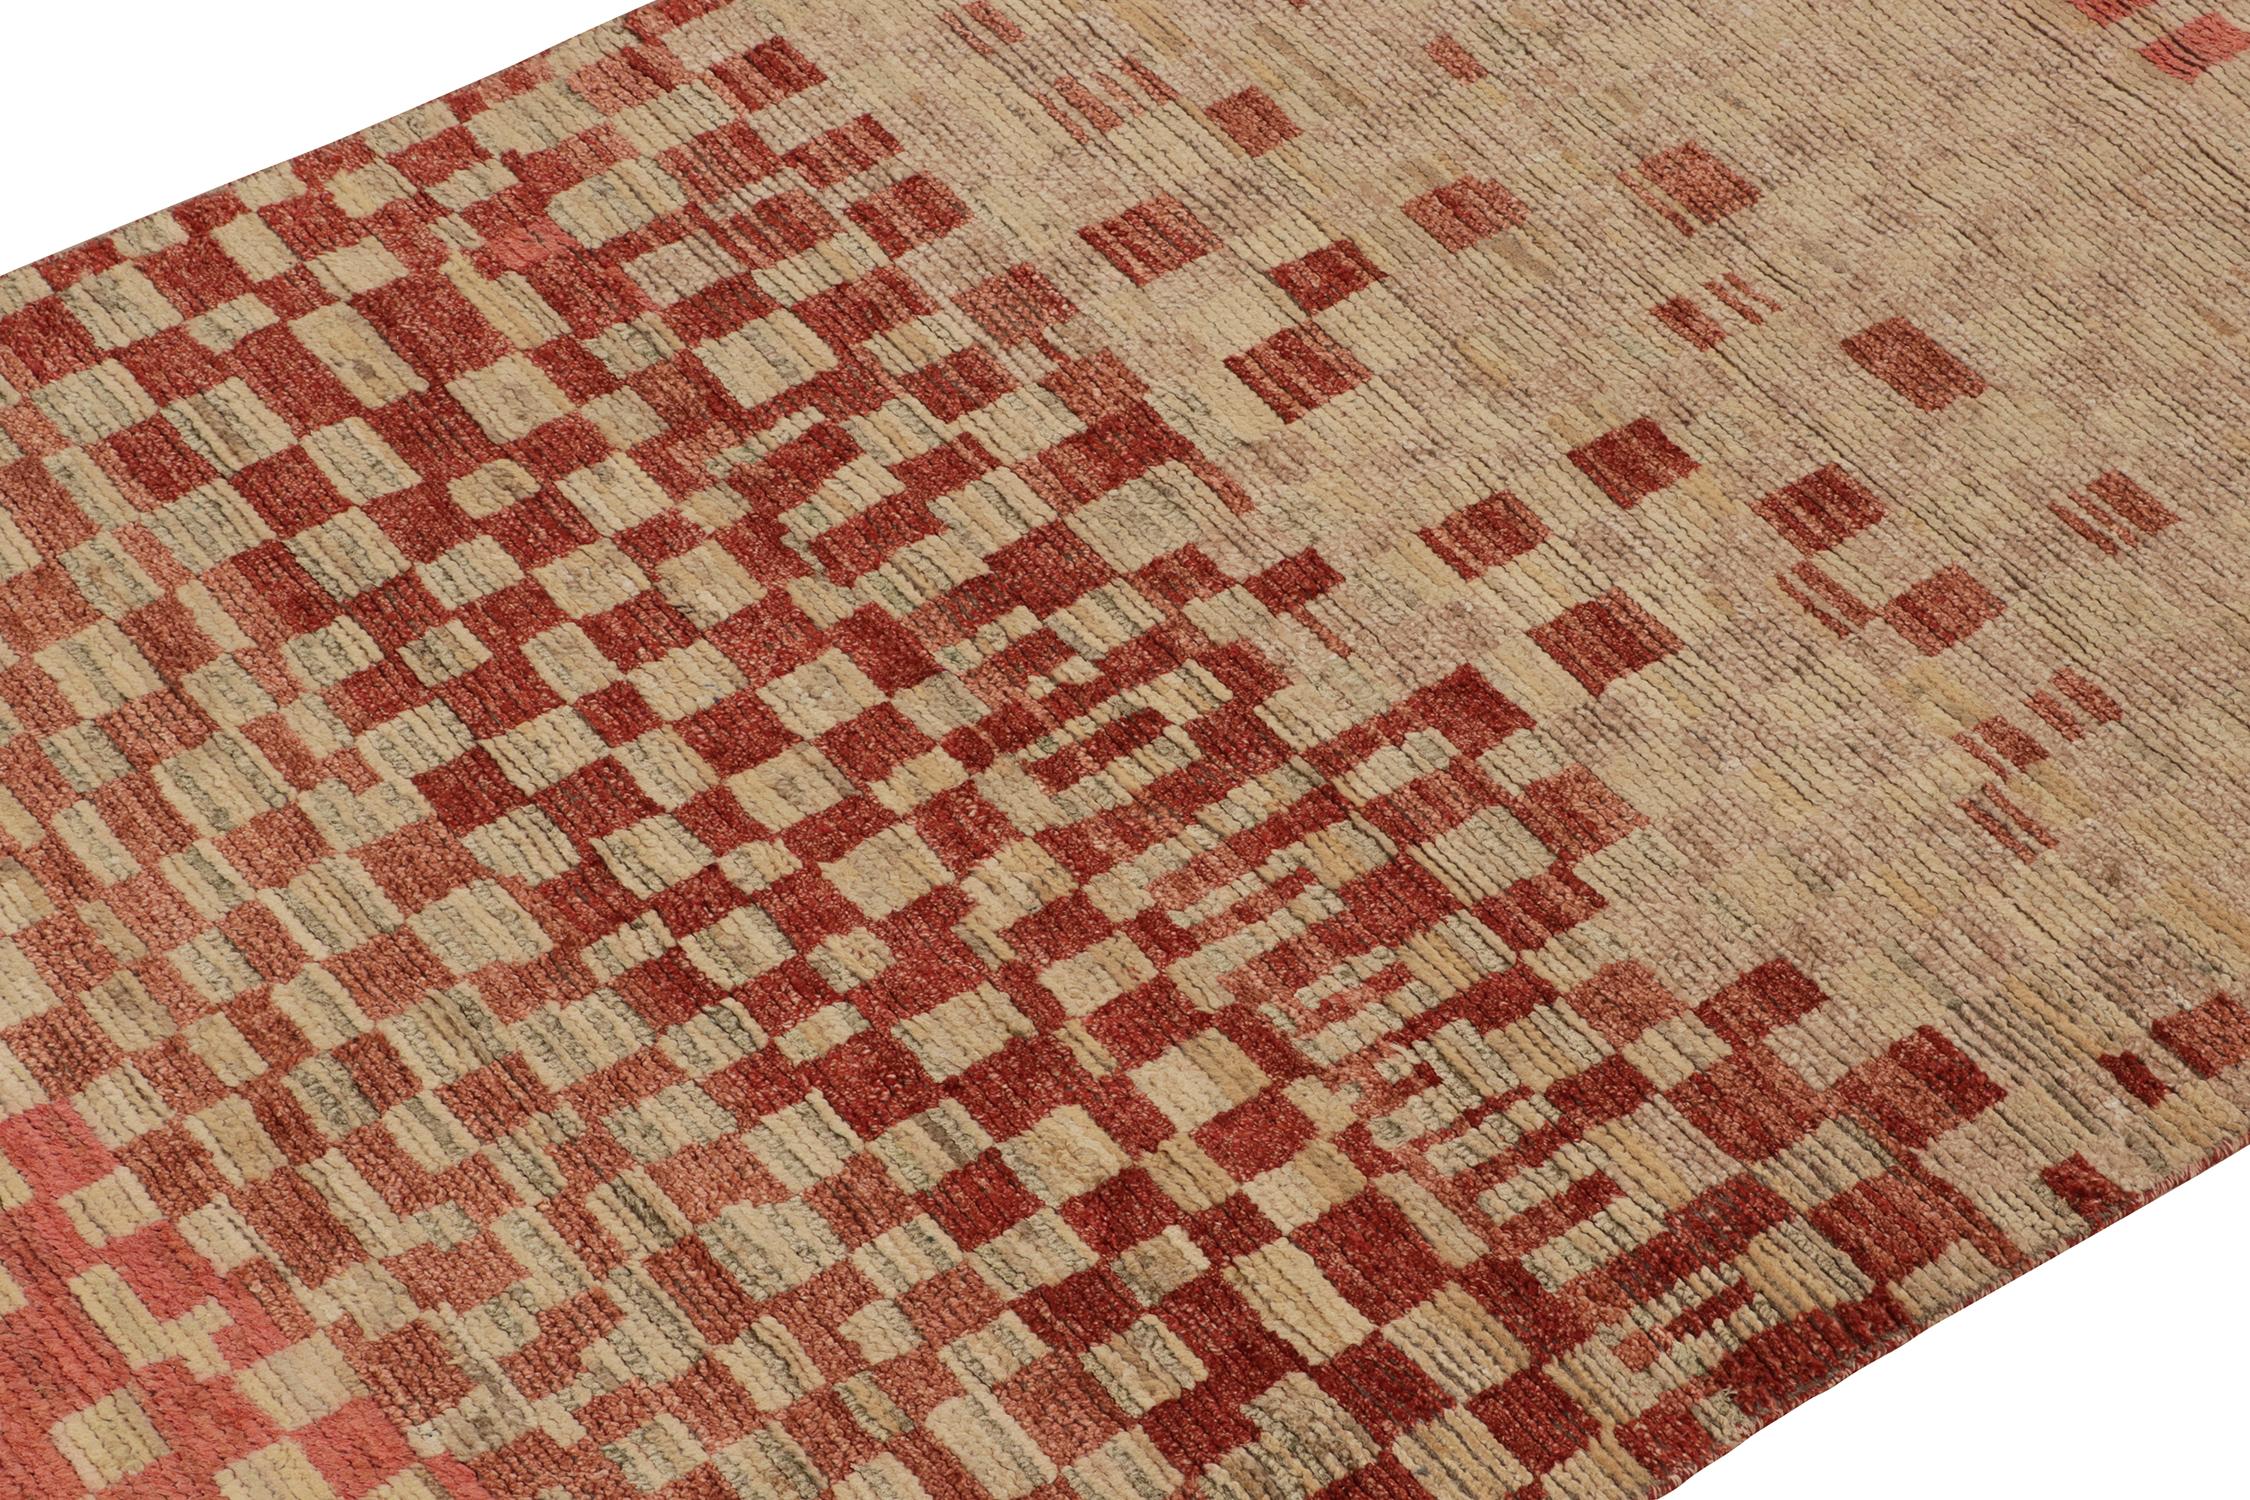 Indian Rug & Kilim’s Moroccan Style Rug in Beige-Brown and Red Geometric Pattern For Sale